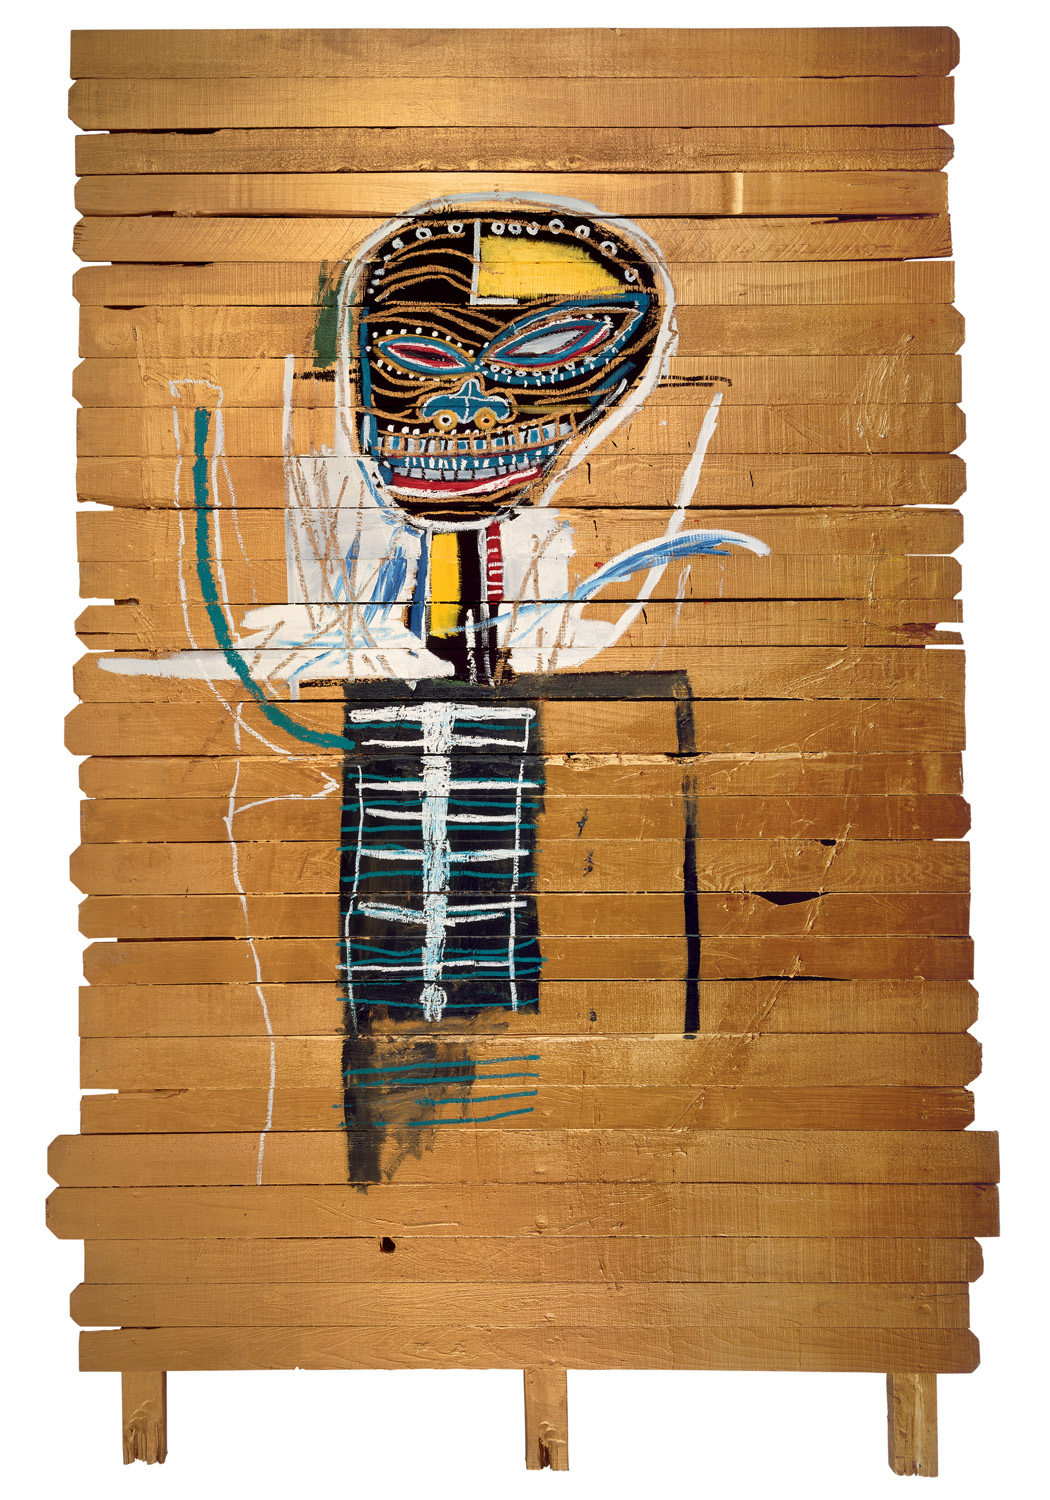 Jean-Michel Basquiat, Gold Griot, 1984, Acrylic and oilstick on wood. The Broad Art Foundation © Estate of Jean-Michel Basquiat. Licensed by Artestar, New York Picture: © Zindman/ Fremont